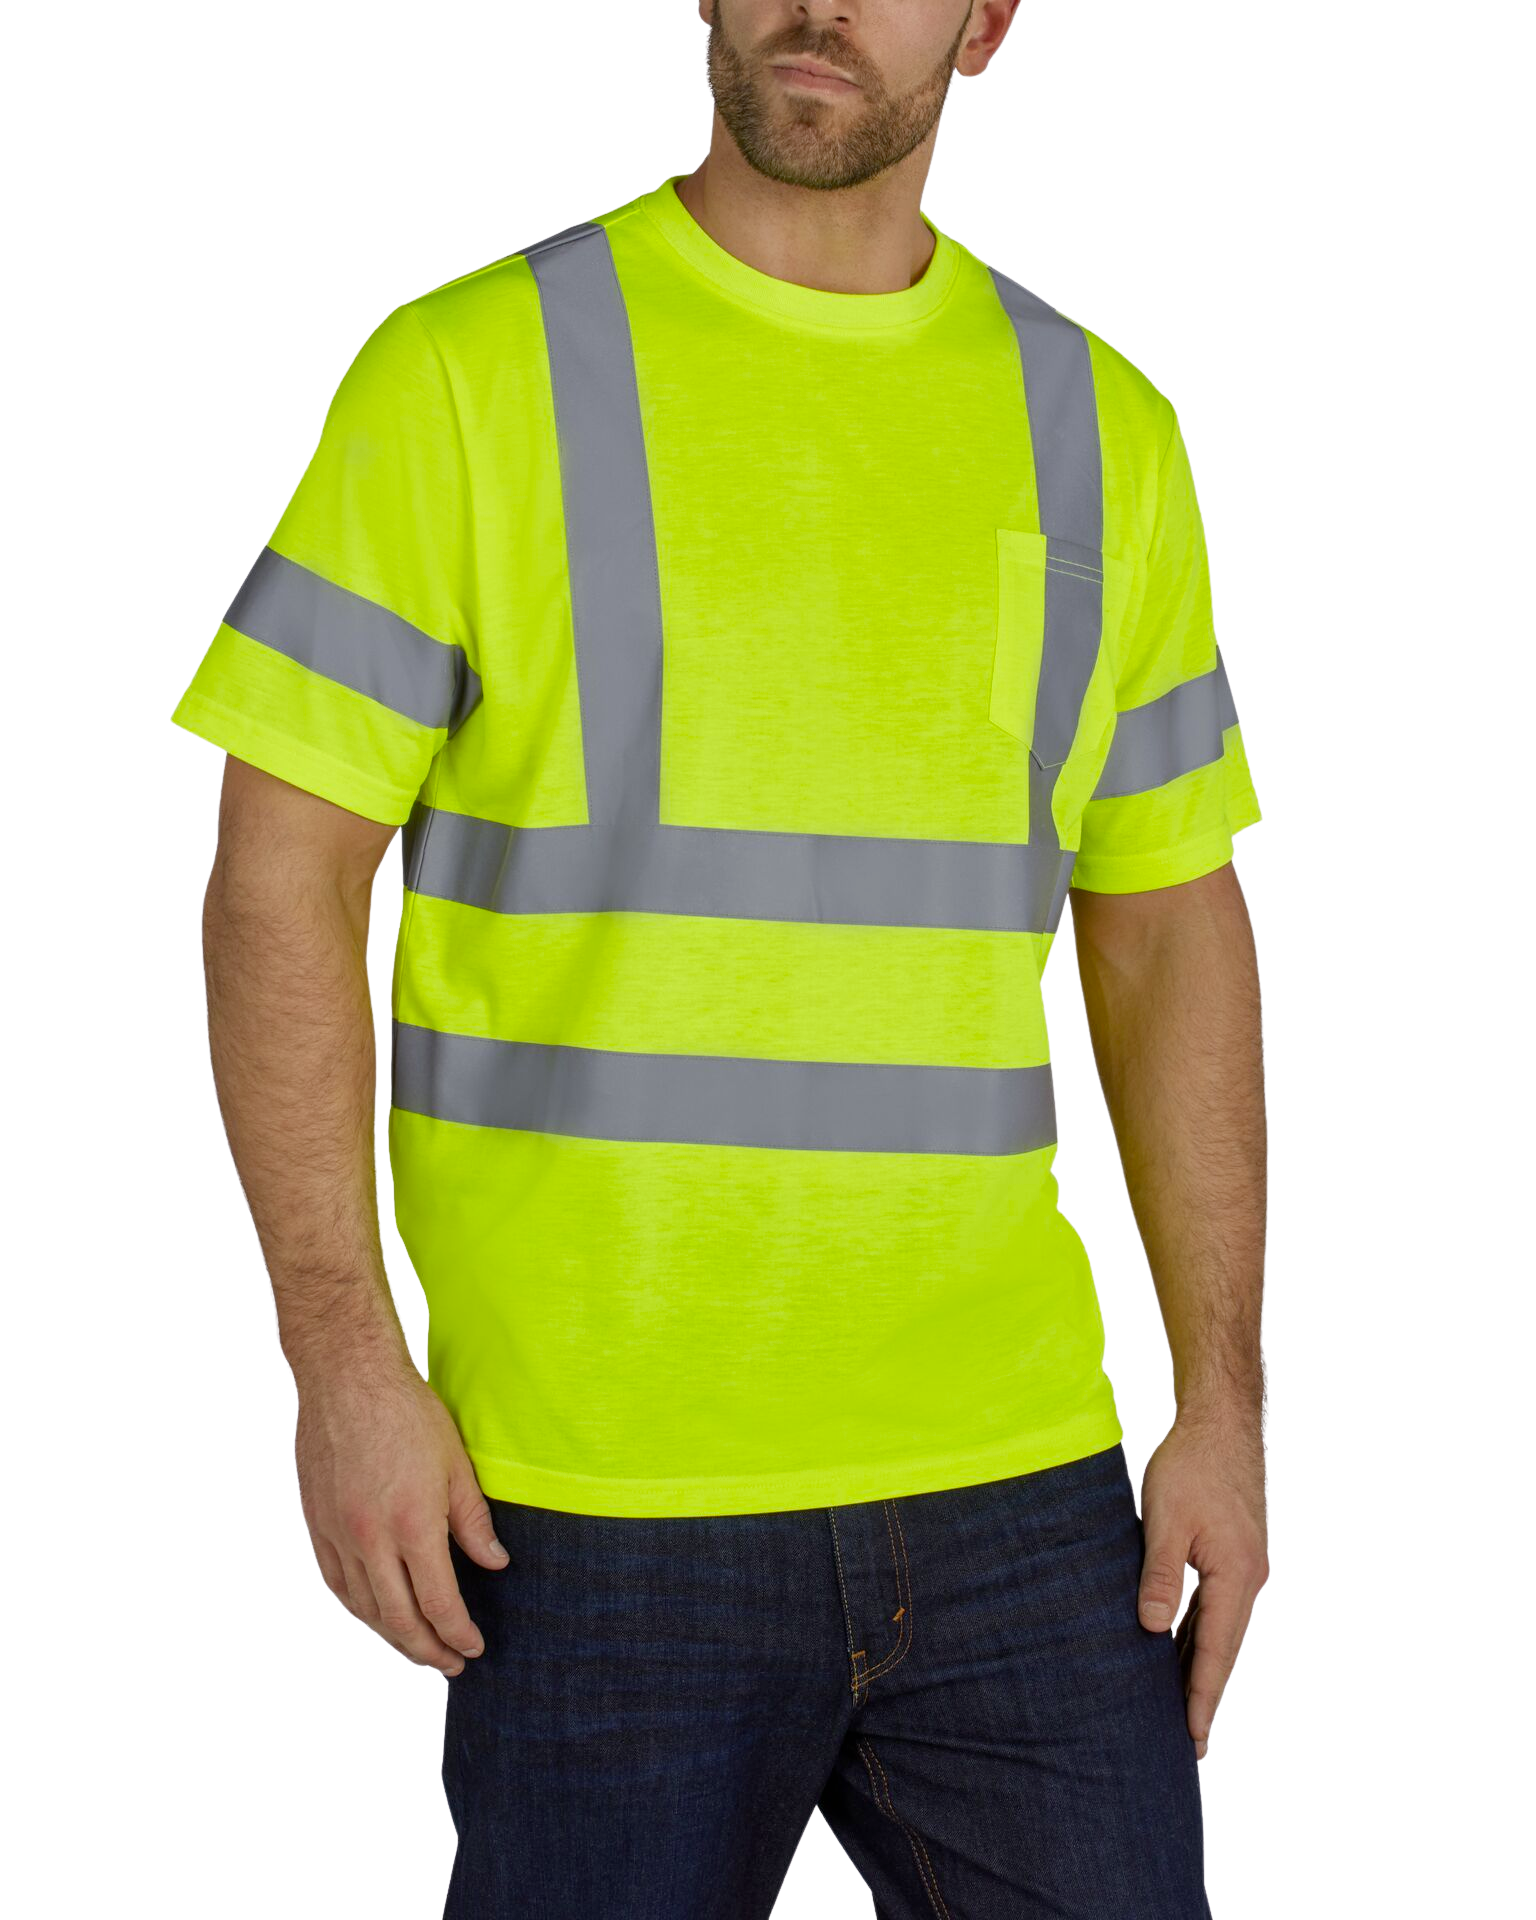 ANSI CLASS 3 High Visibility t-shirt lightweight performance repels water by Utility Pro